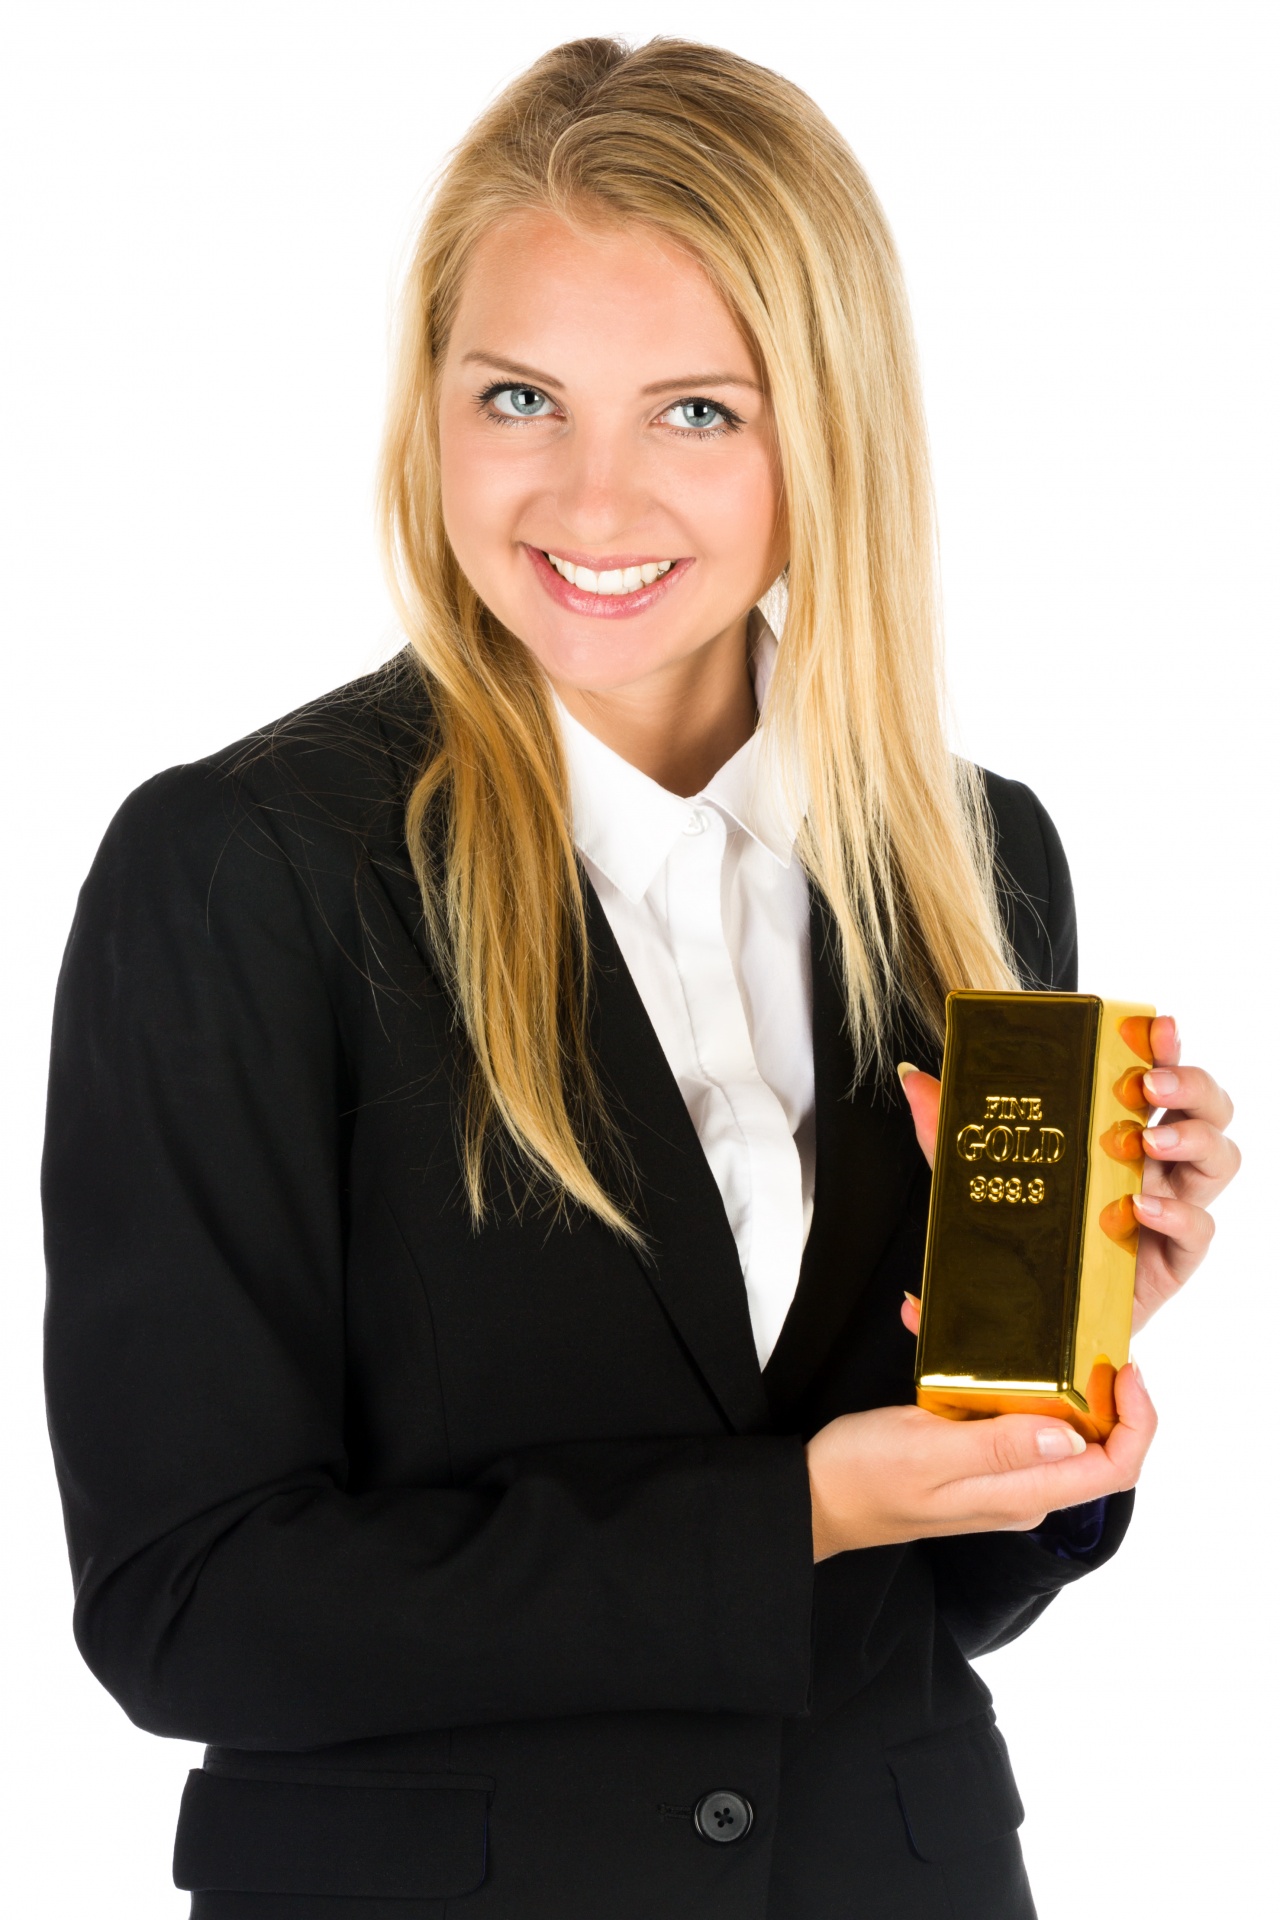 https://www.publicdomainpictures.net/pictures/190000/velka/business-woman-and-a-gold-bar-1470483216x19.jpg